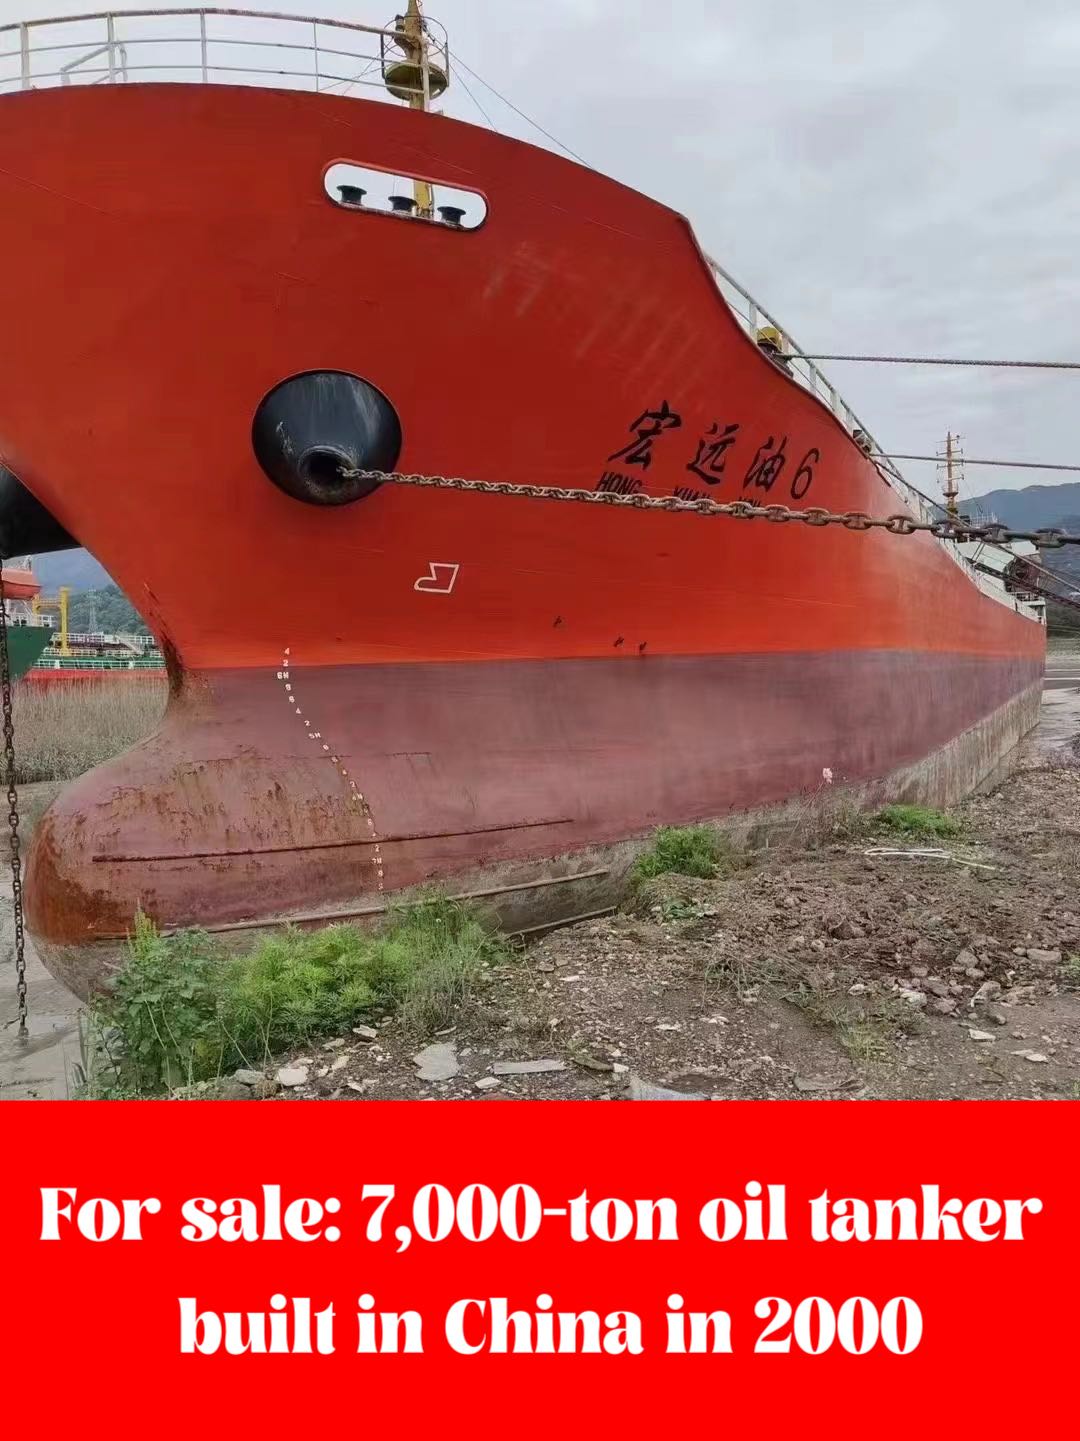 For sale: 7,000-ton oil tanker built in China in 2000